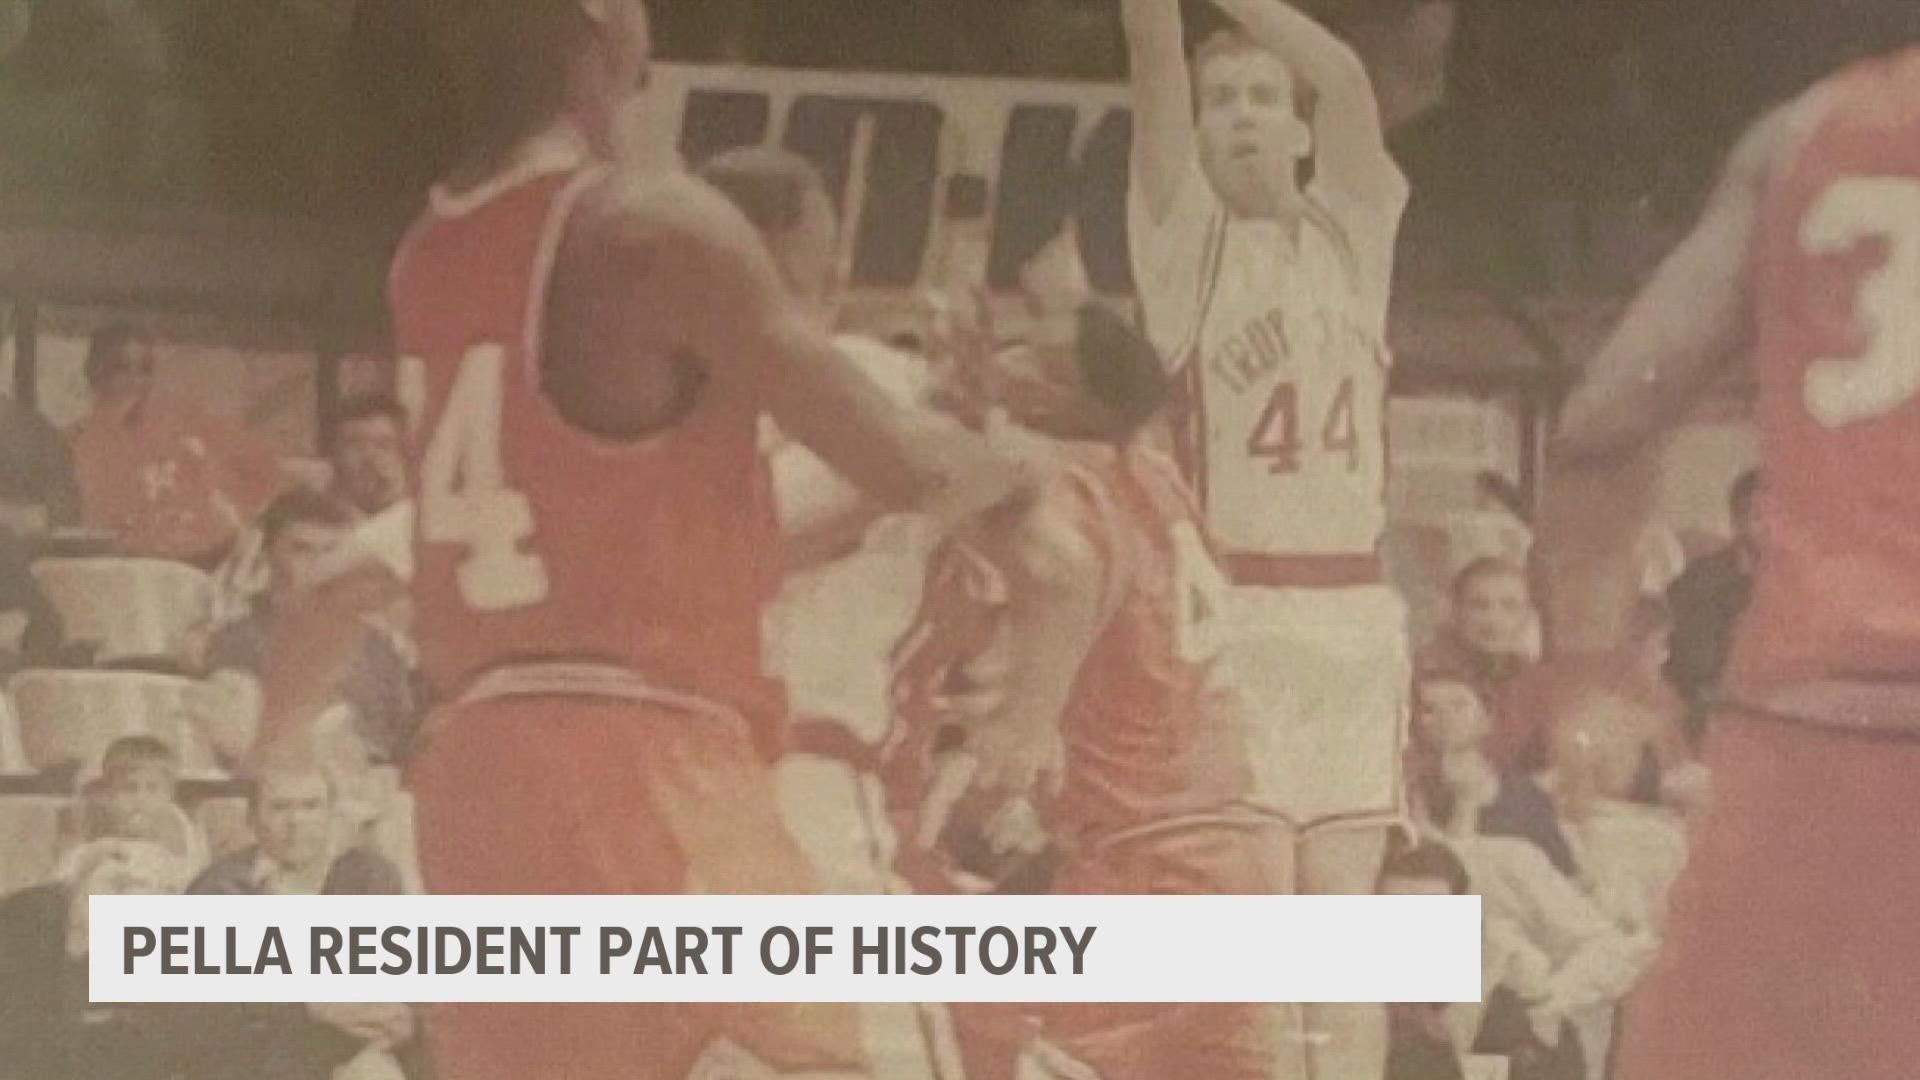 Troy University defeated Devry 258-141 in the highest-scoring men's basketball team in NCAA history. Pella resident Brian Simpson scored 37 points that day.